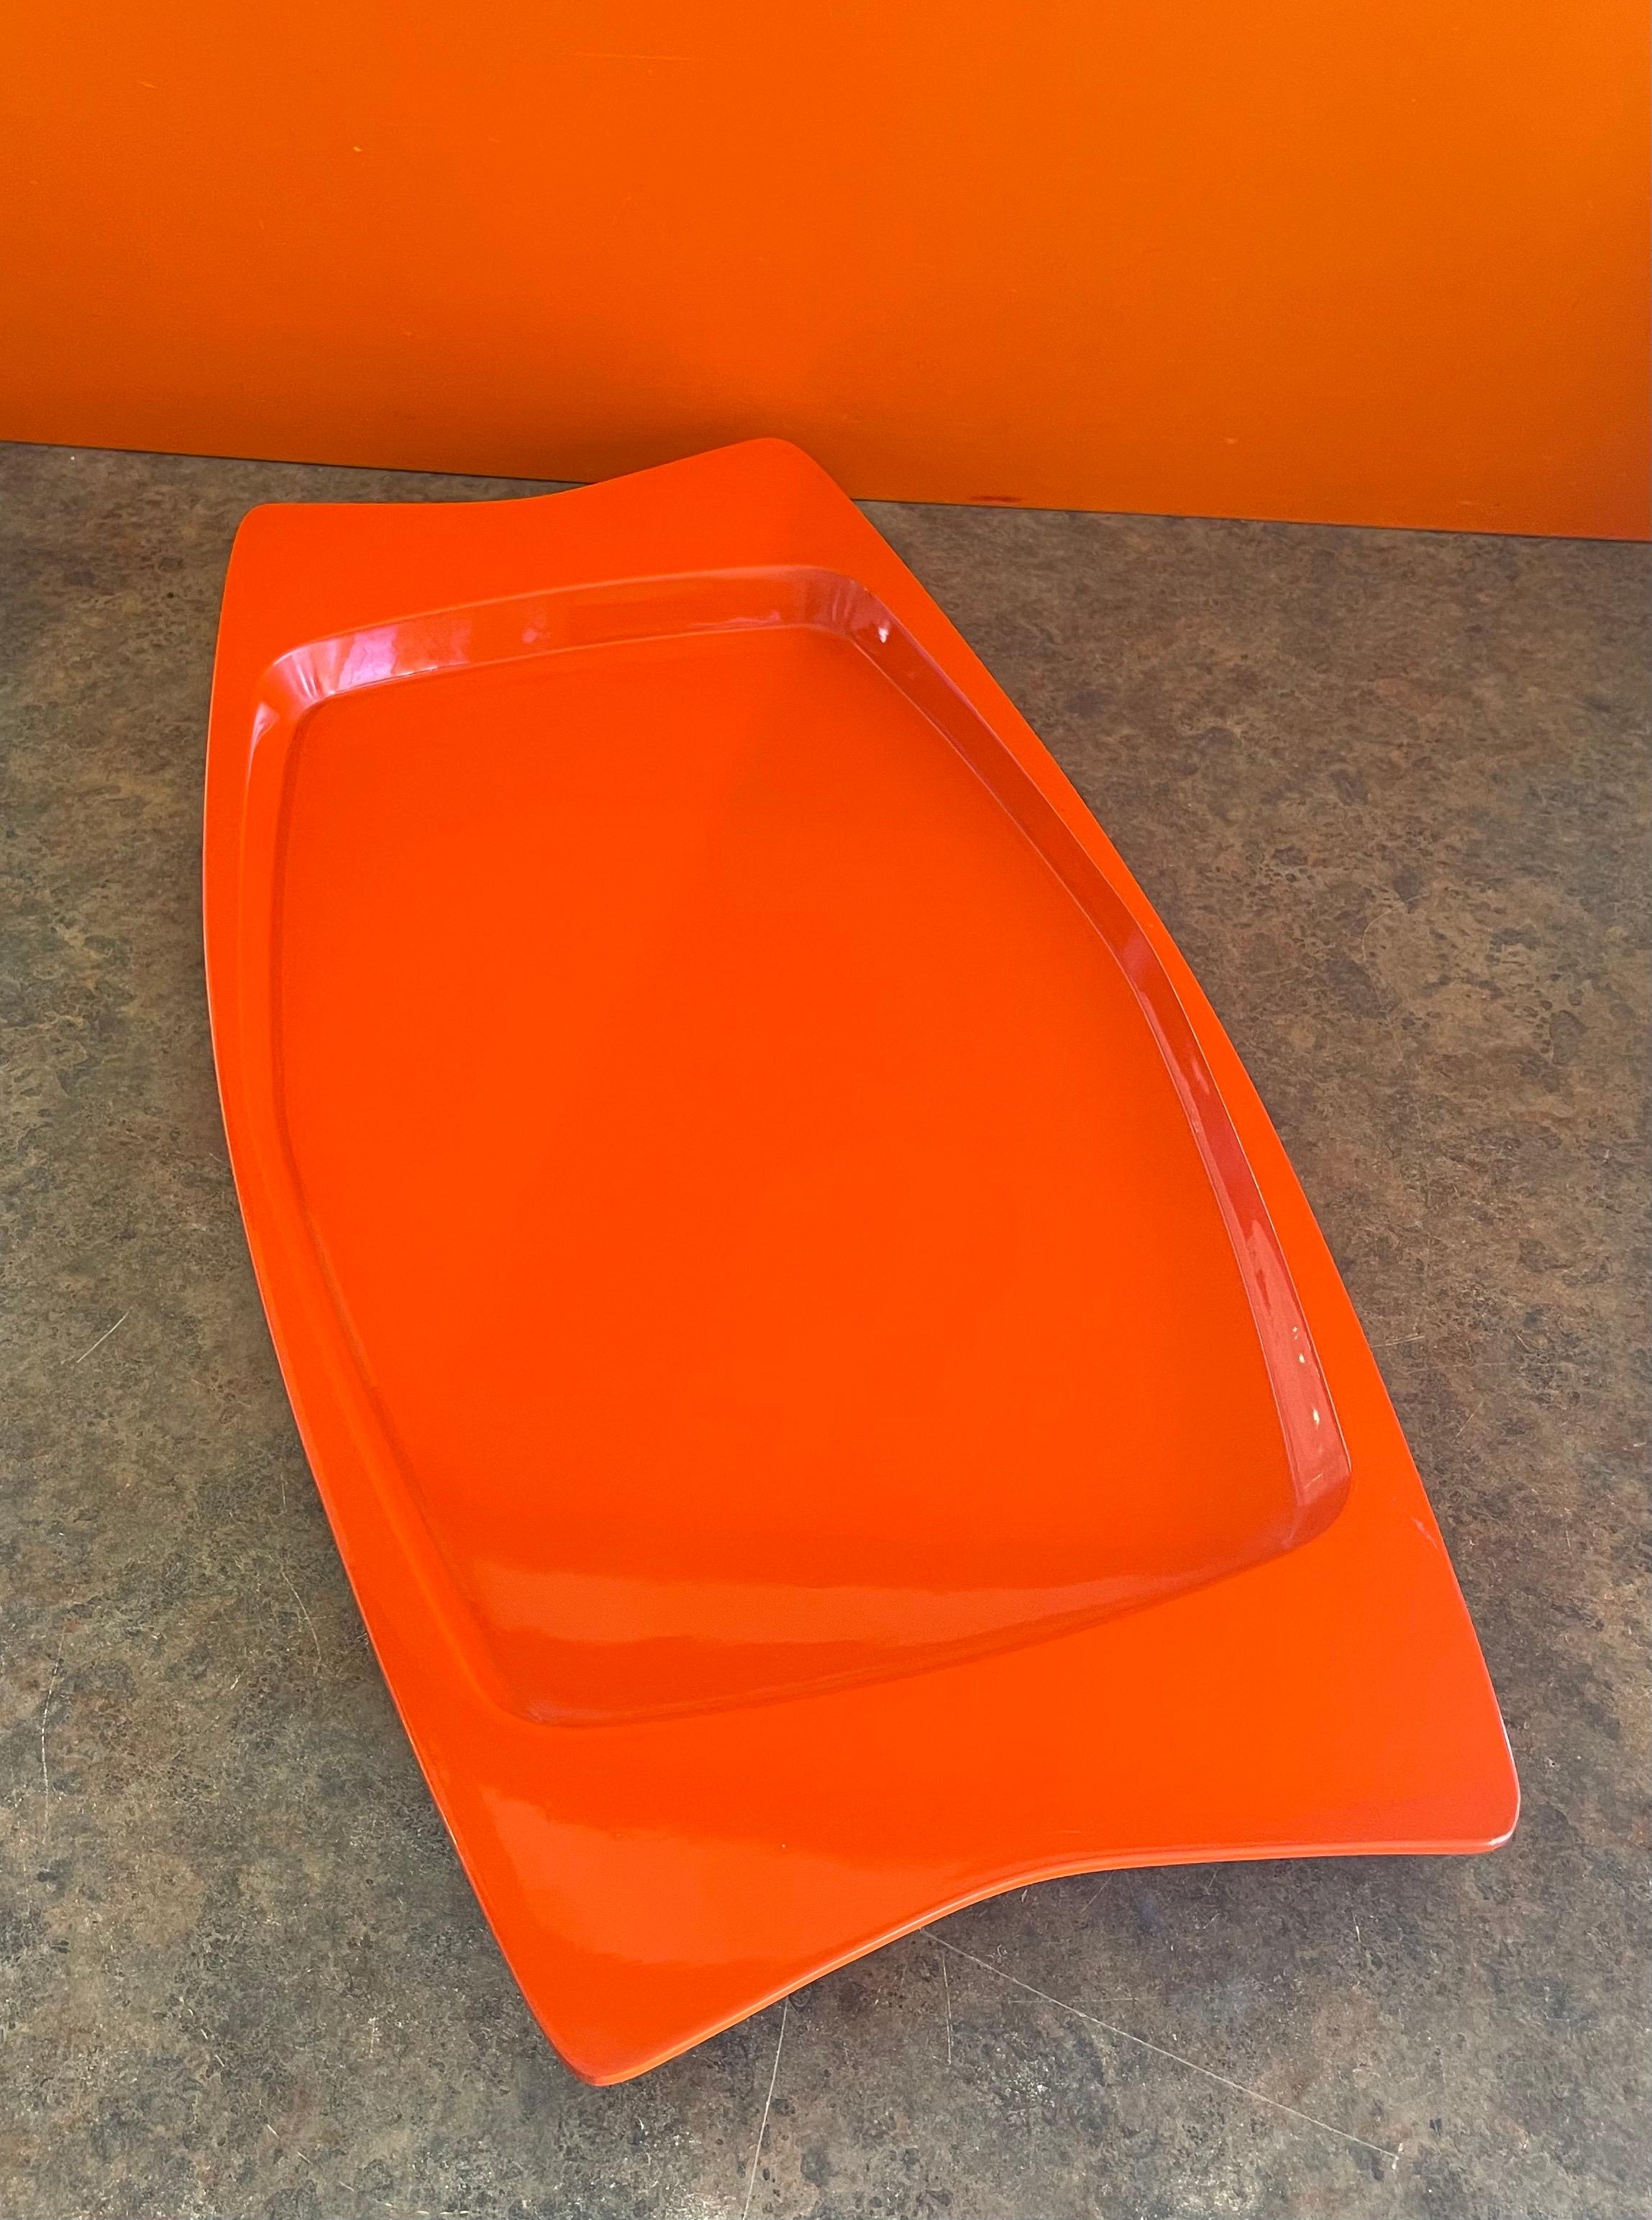 Danish Extra Large Orange Lacquer Tray by Jens Quistgaard for Dansk- Early Production